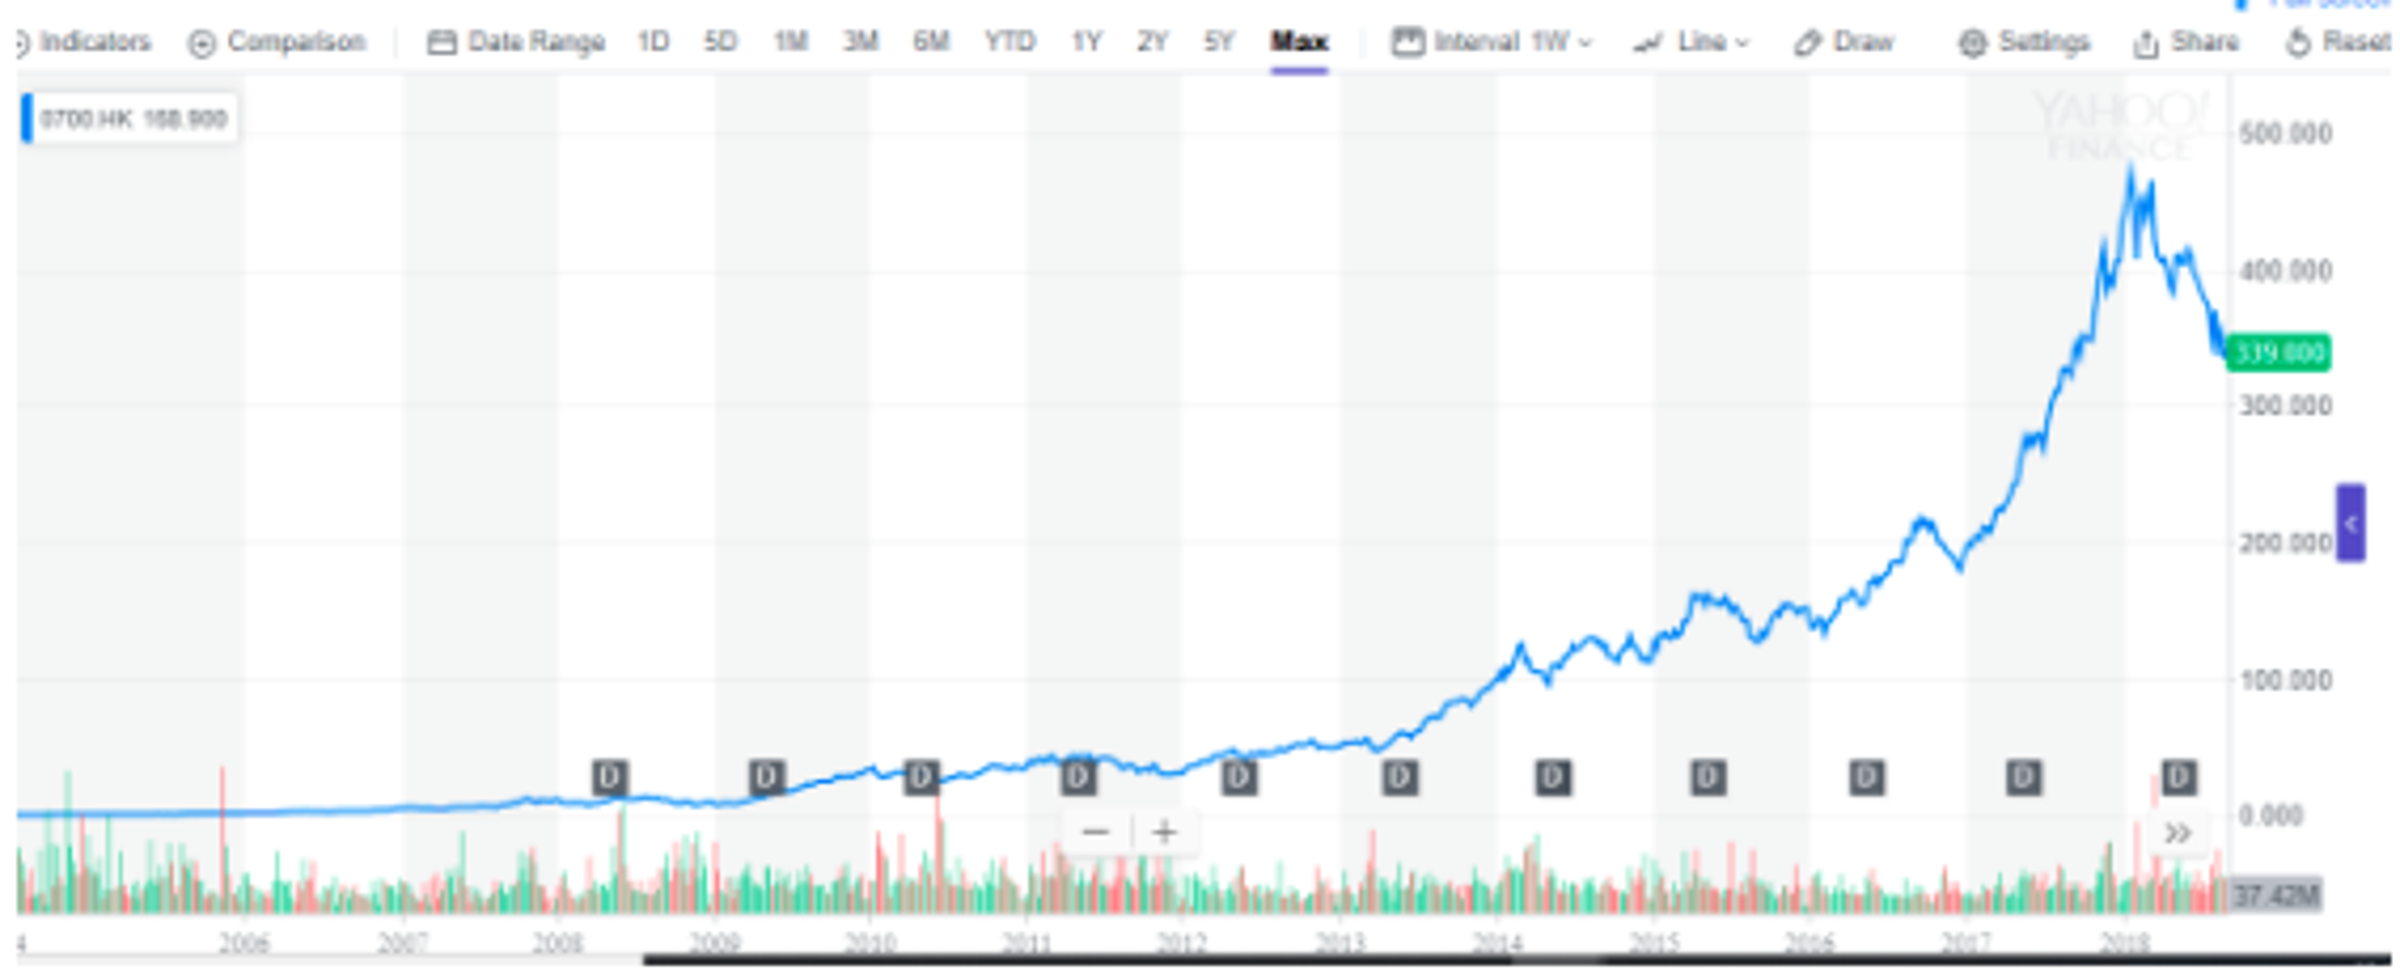 Tencent's historical performance. Source: Yahoo Finance